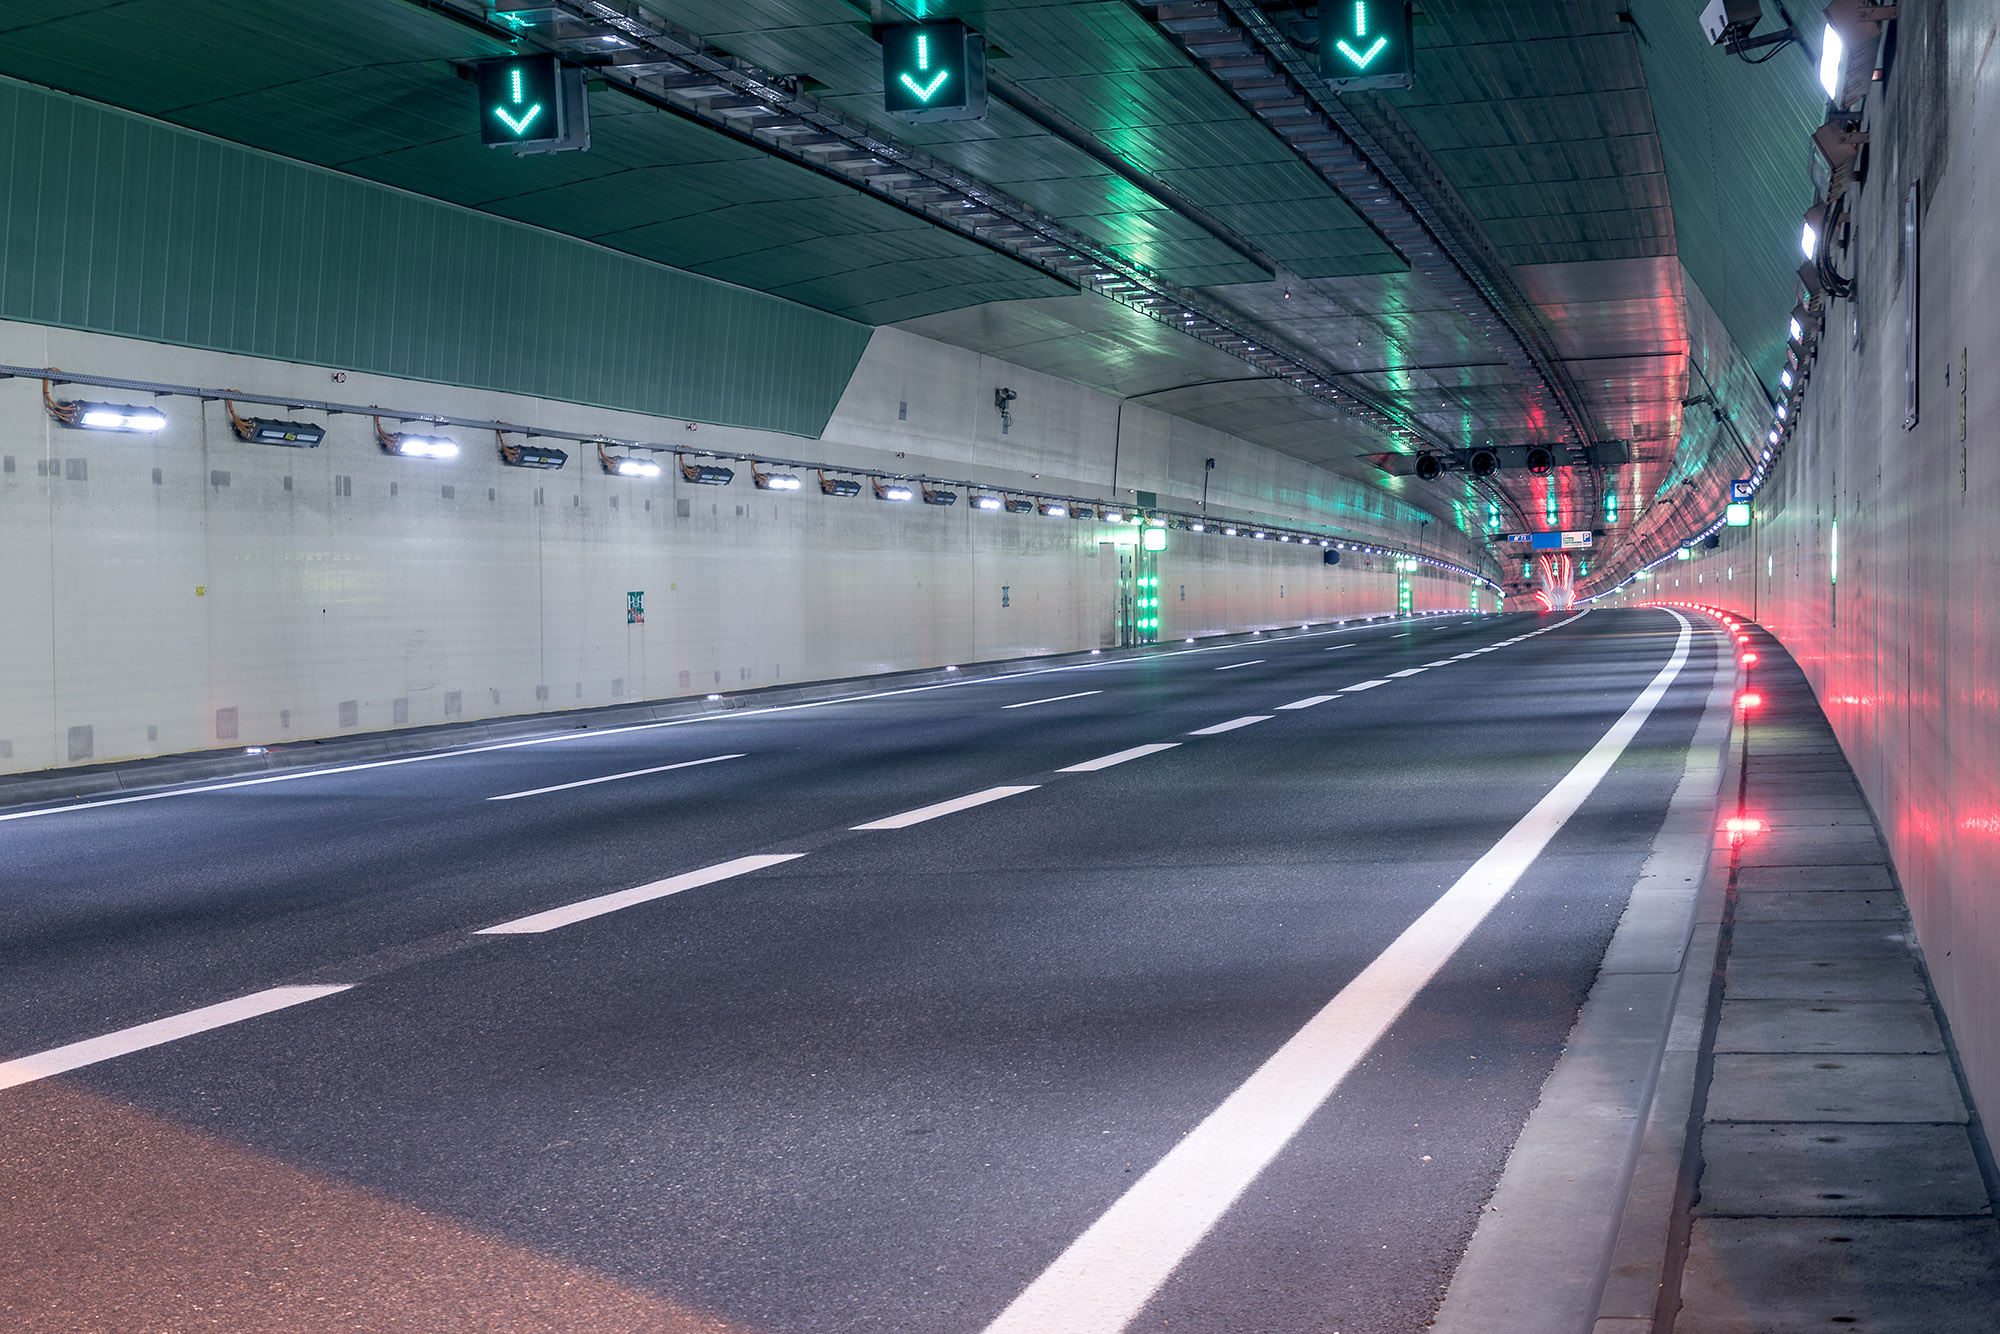 Tunnels communication systems - No traffic in the road tunnel